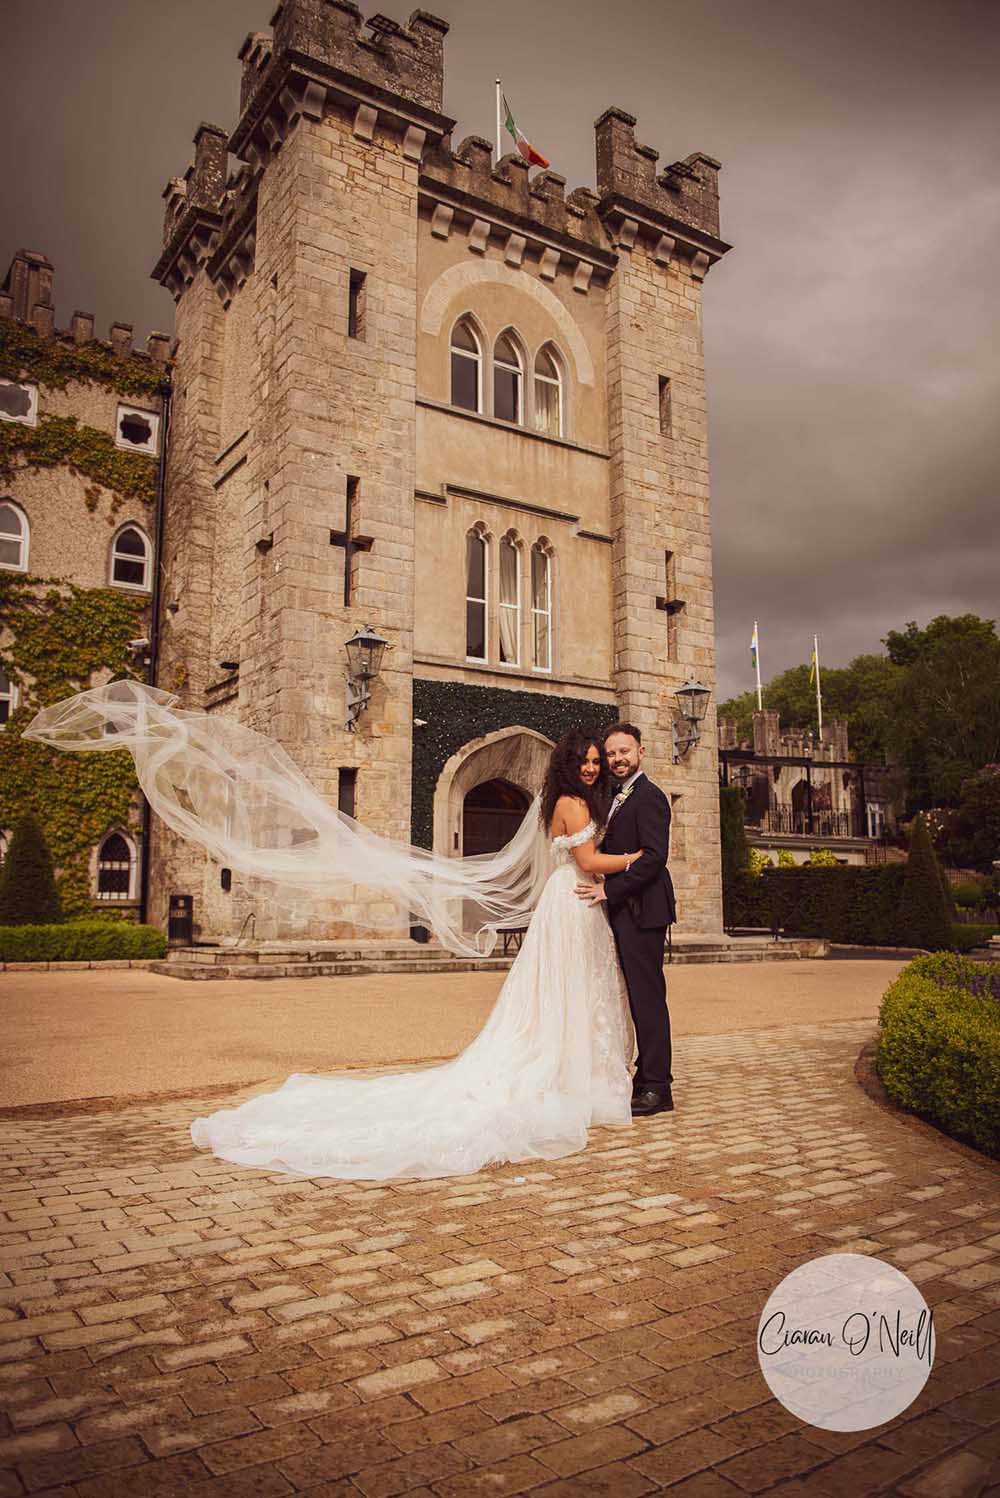 Bride & Groom standing embracing in front of the Cabra Castle main entrance